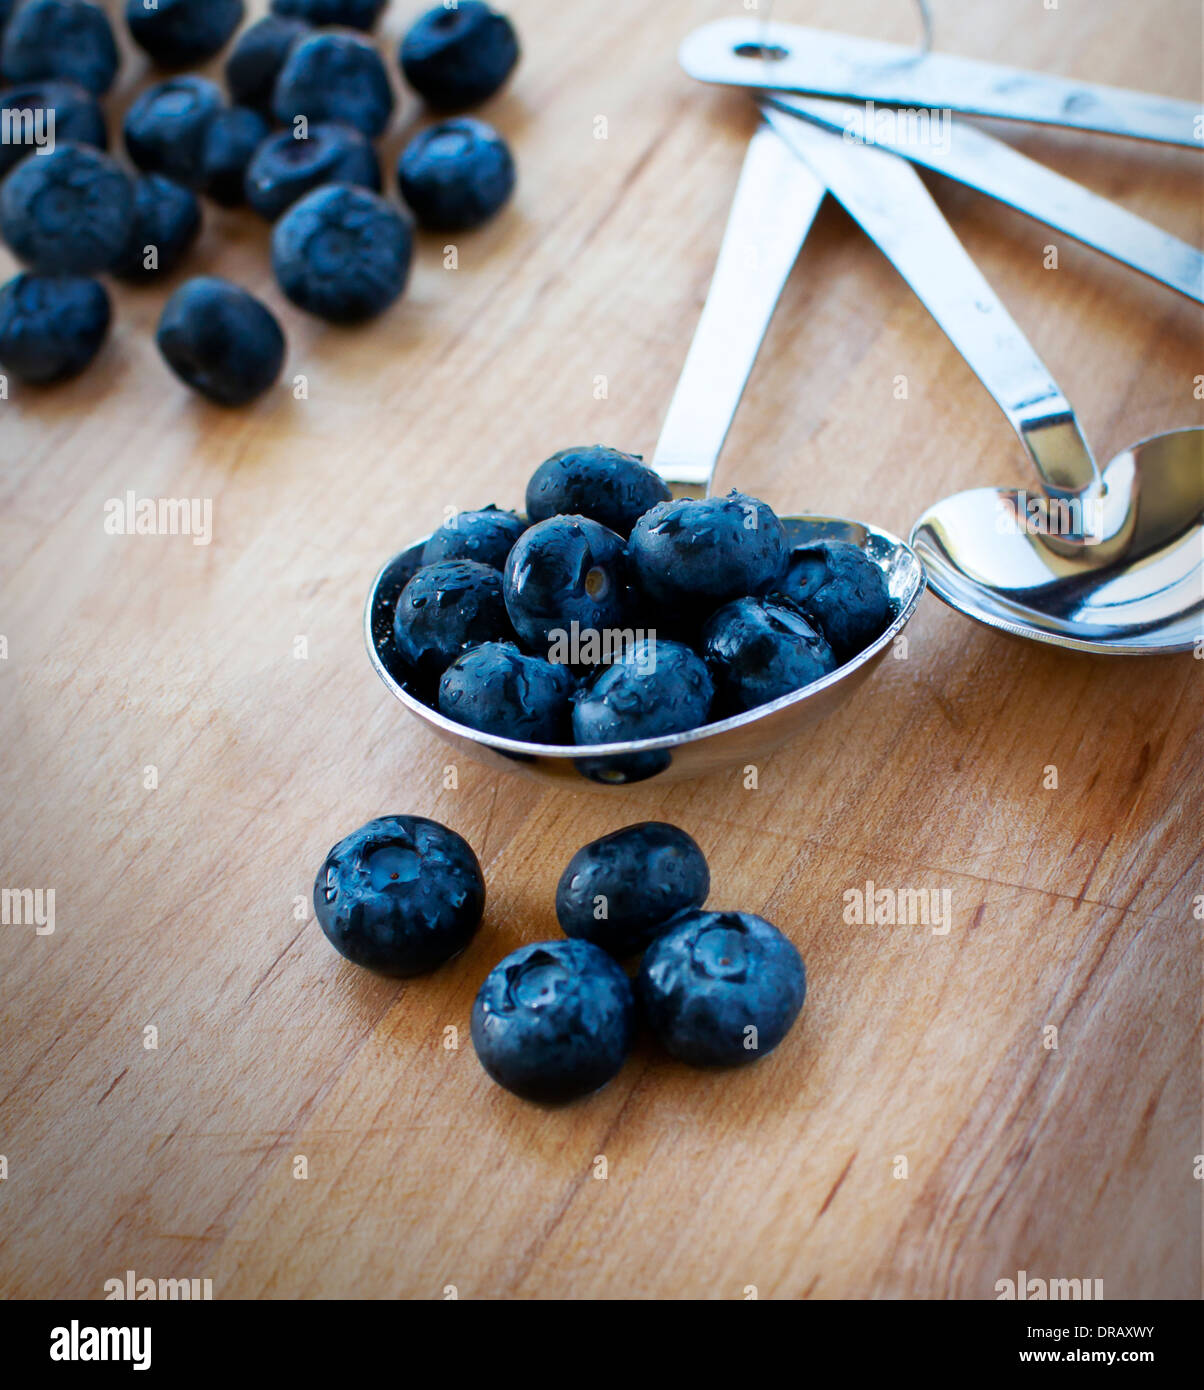 Tablespoon full of blueberries Stock Photo